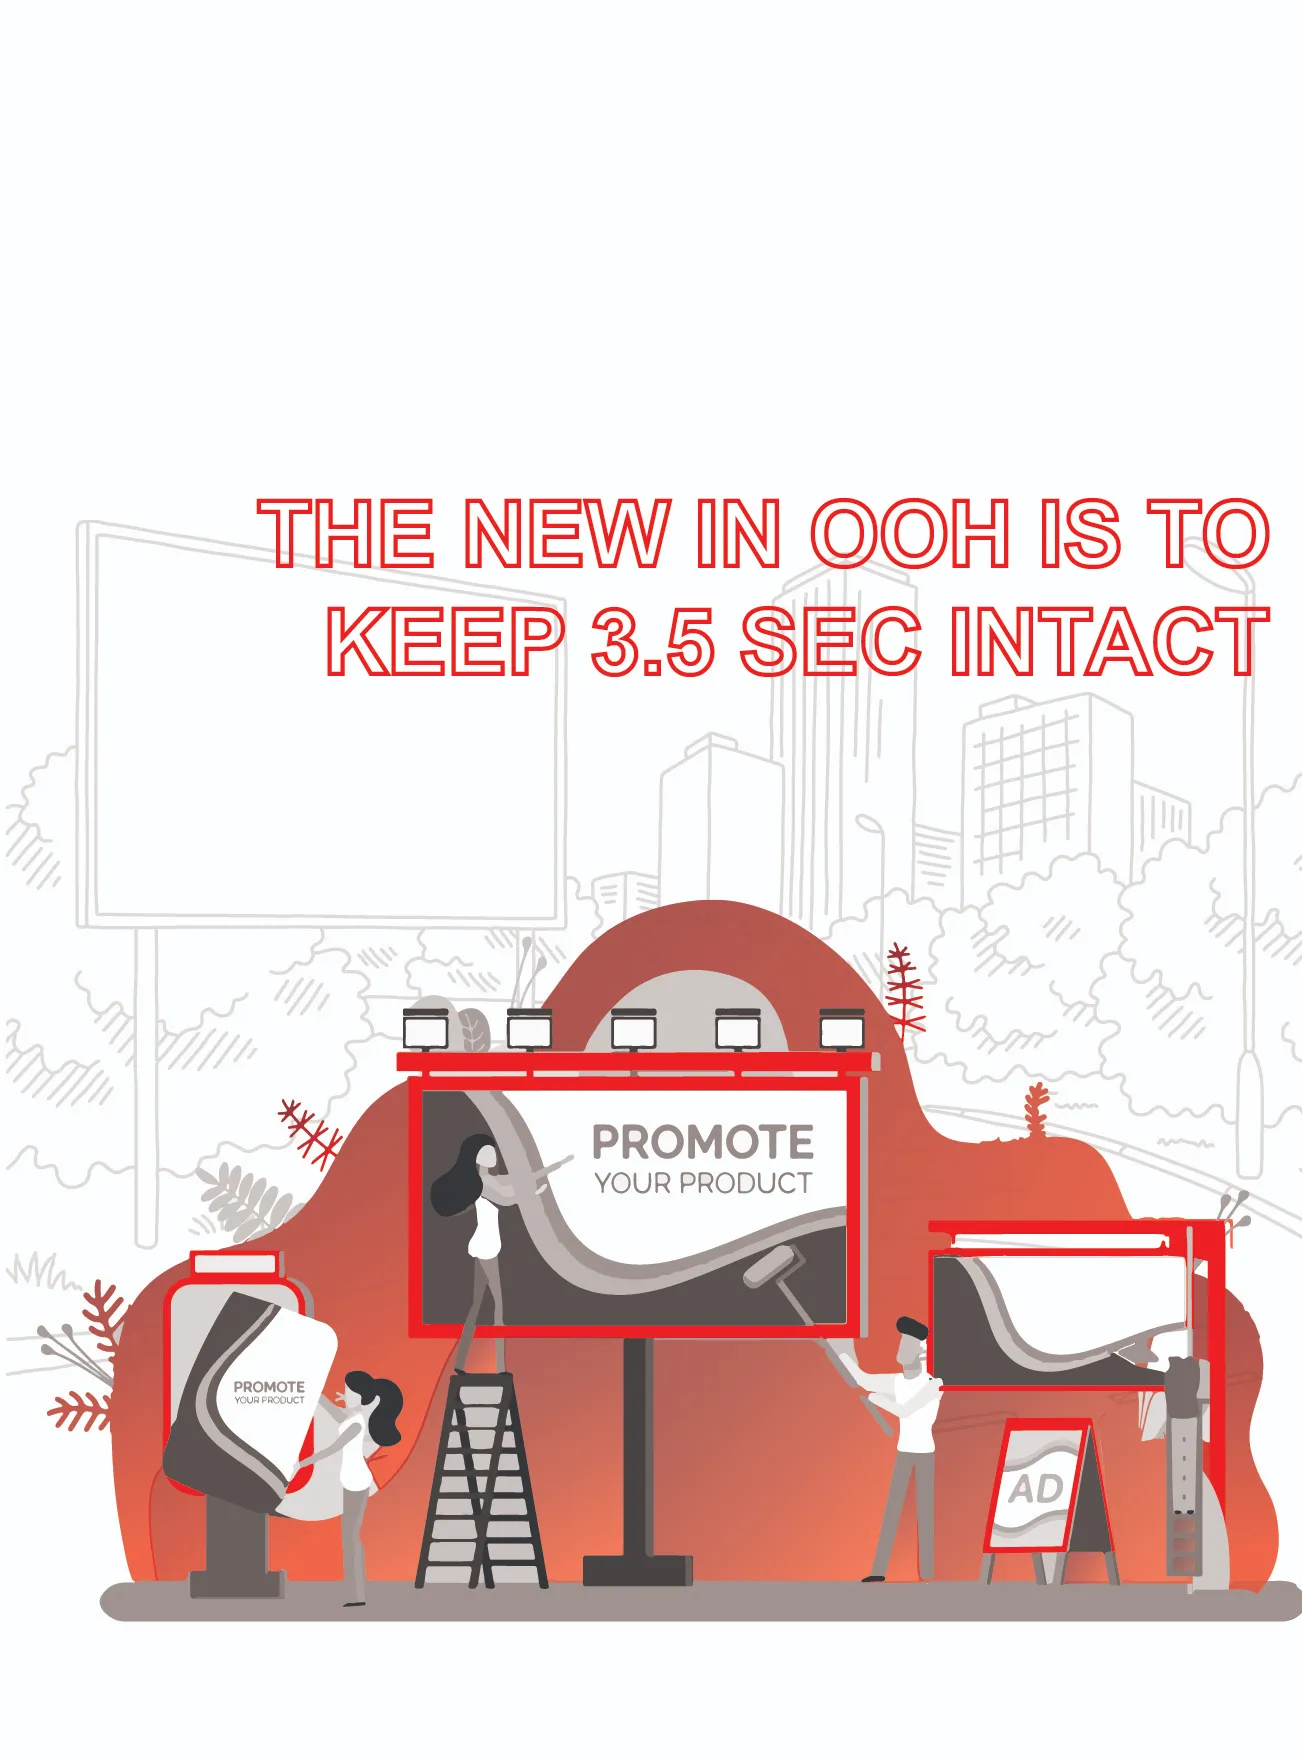 The new in ooh is to keep 3.5 sec intact